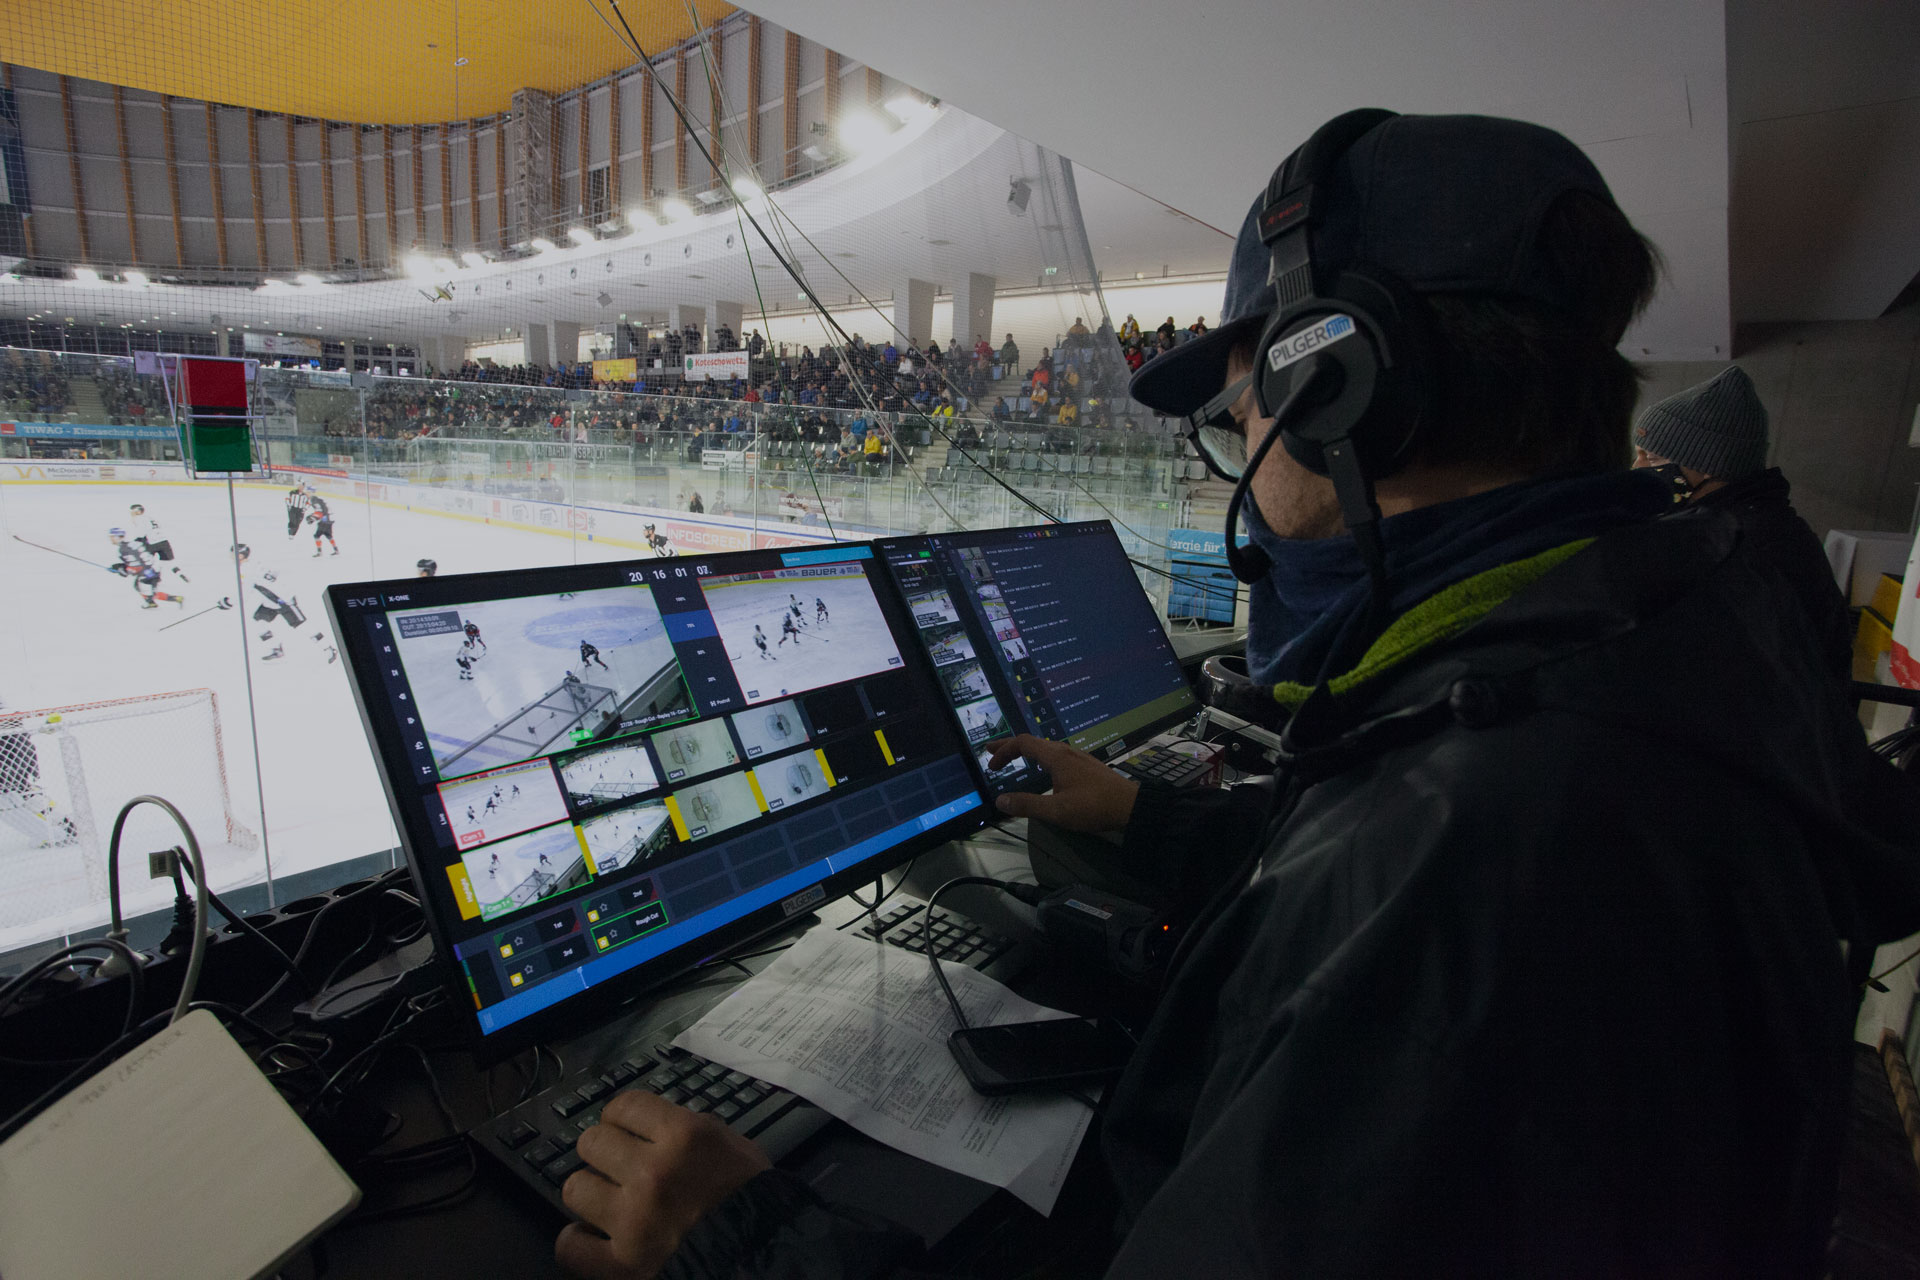 PILGERfilm selects X-One to produce and stream fringe sports and lower-league games